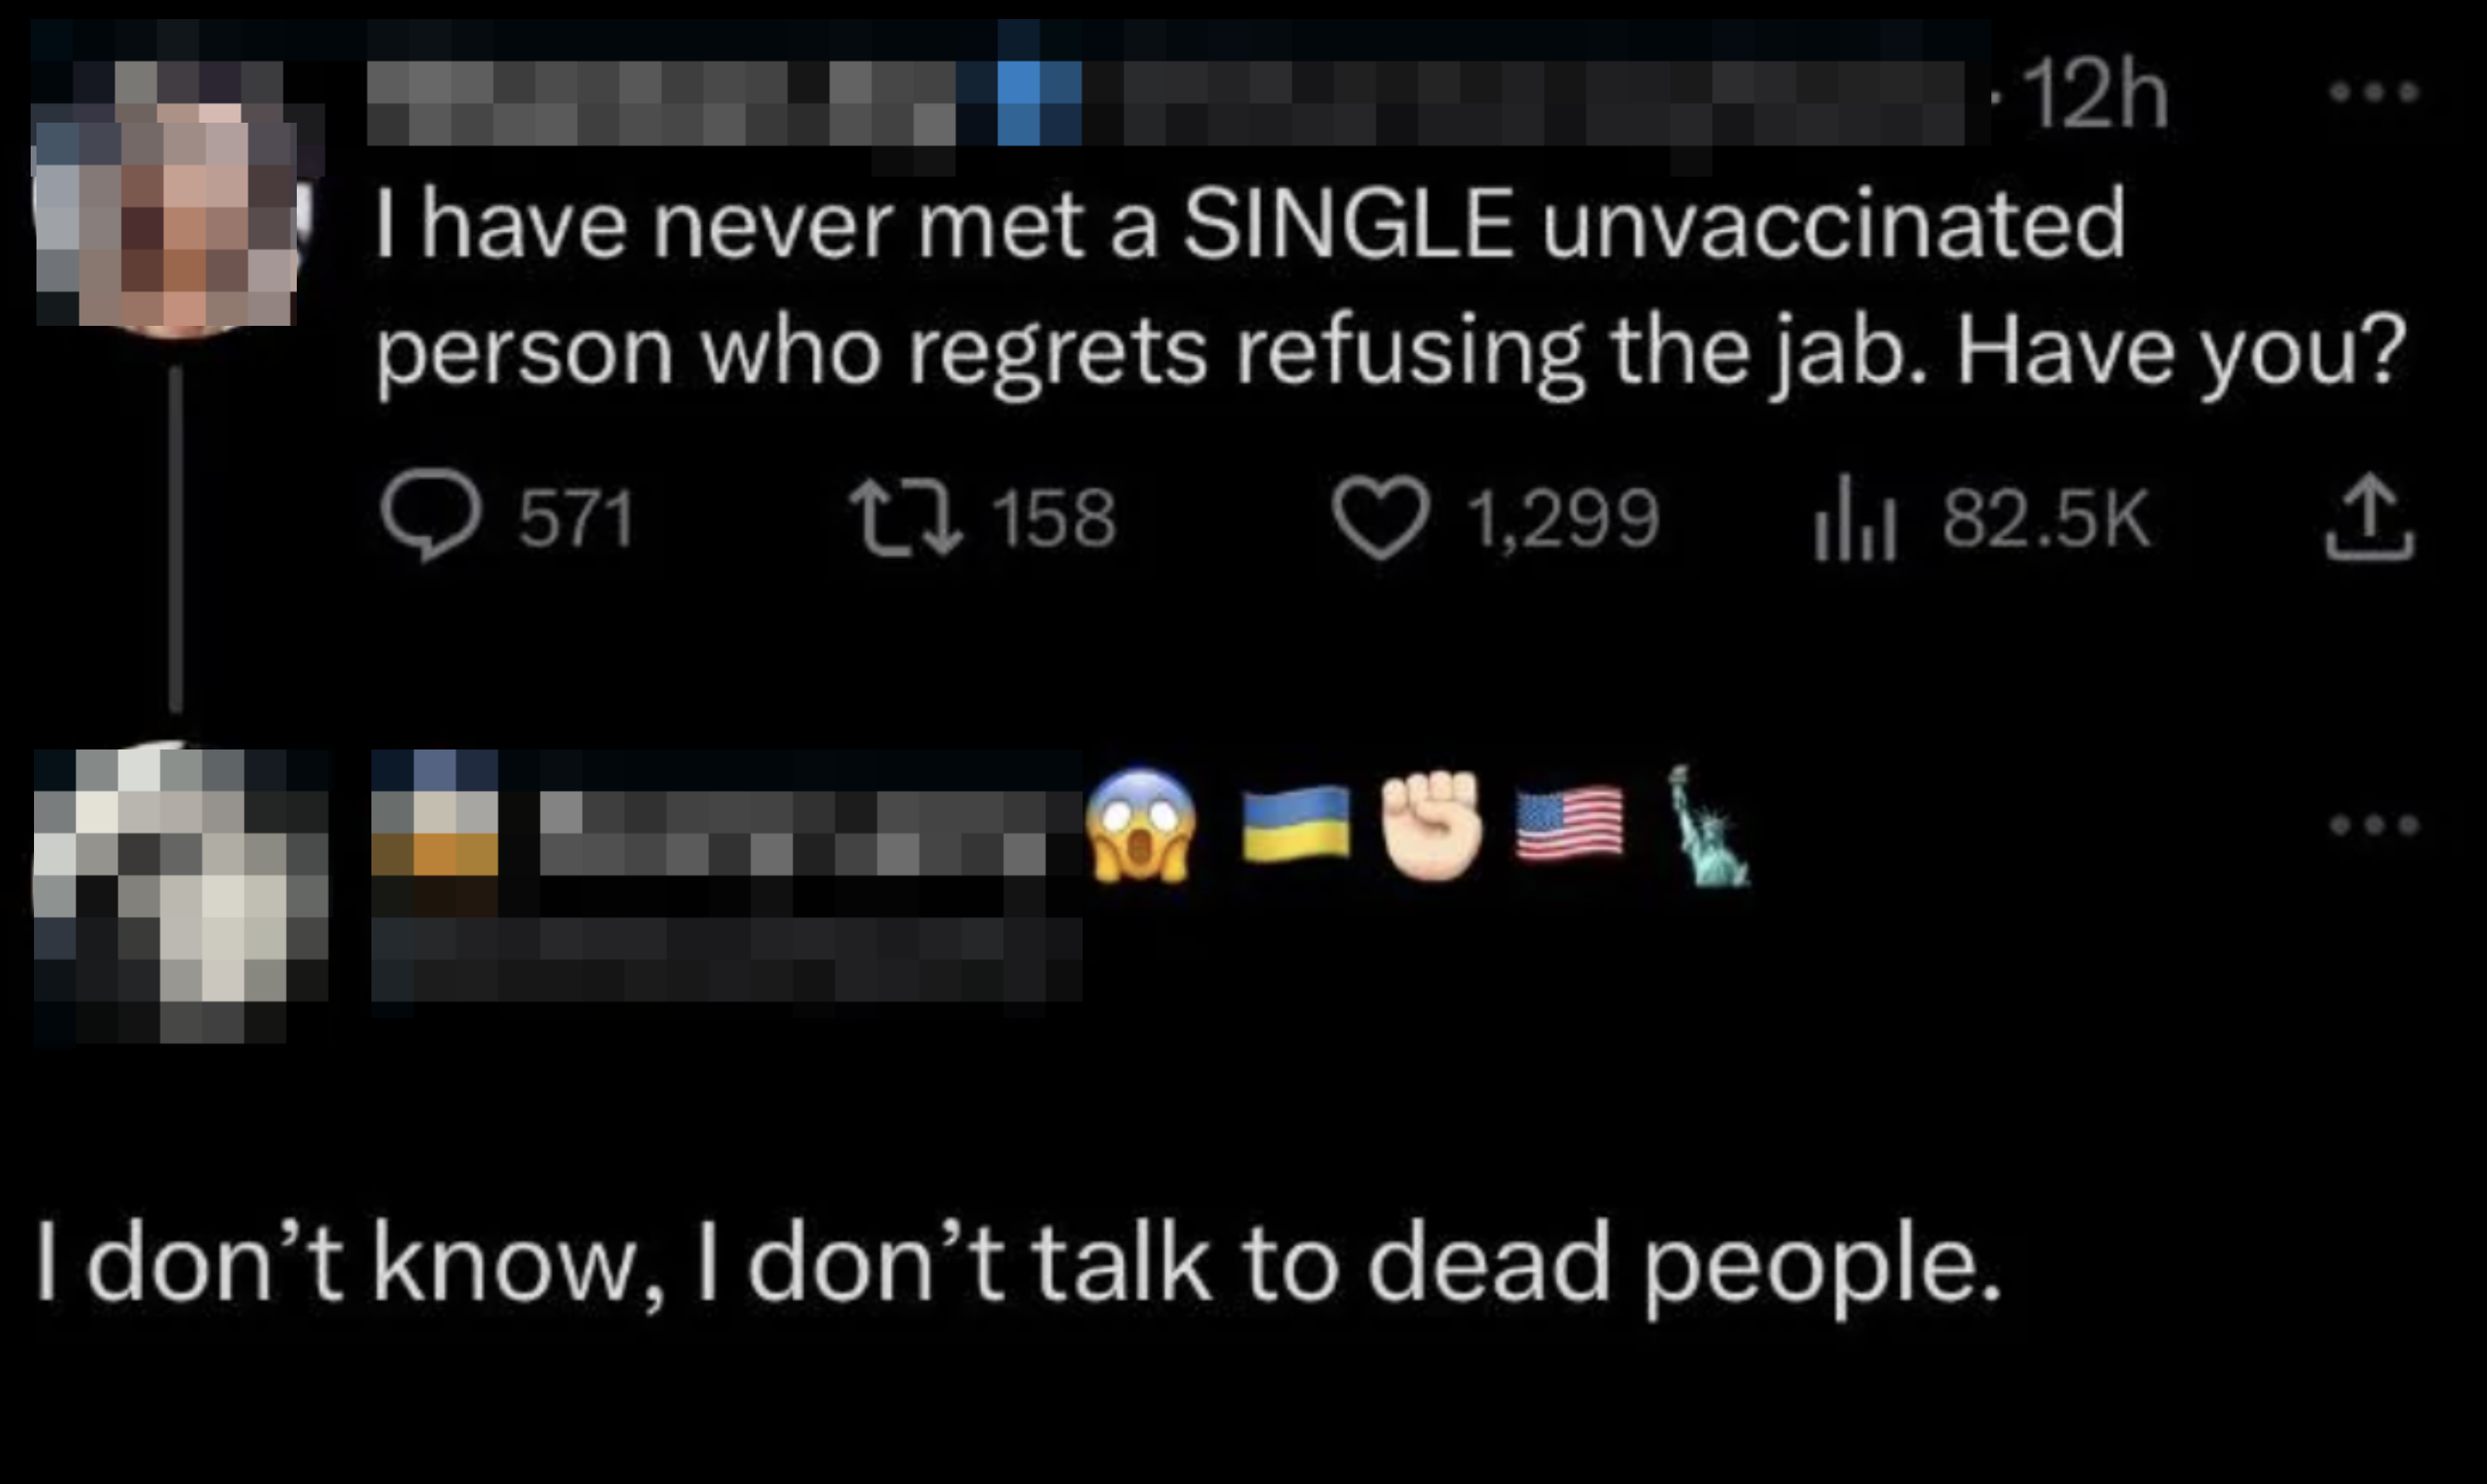 Tweet exchange: User expresses regret refusing vaccine, another comments on not talking to deceased